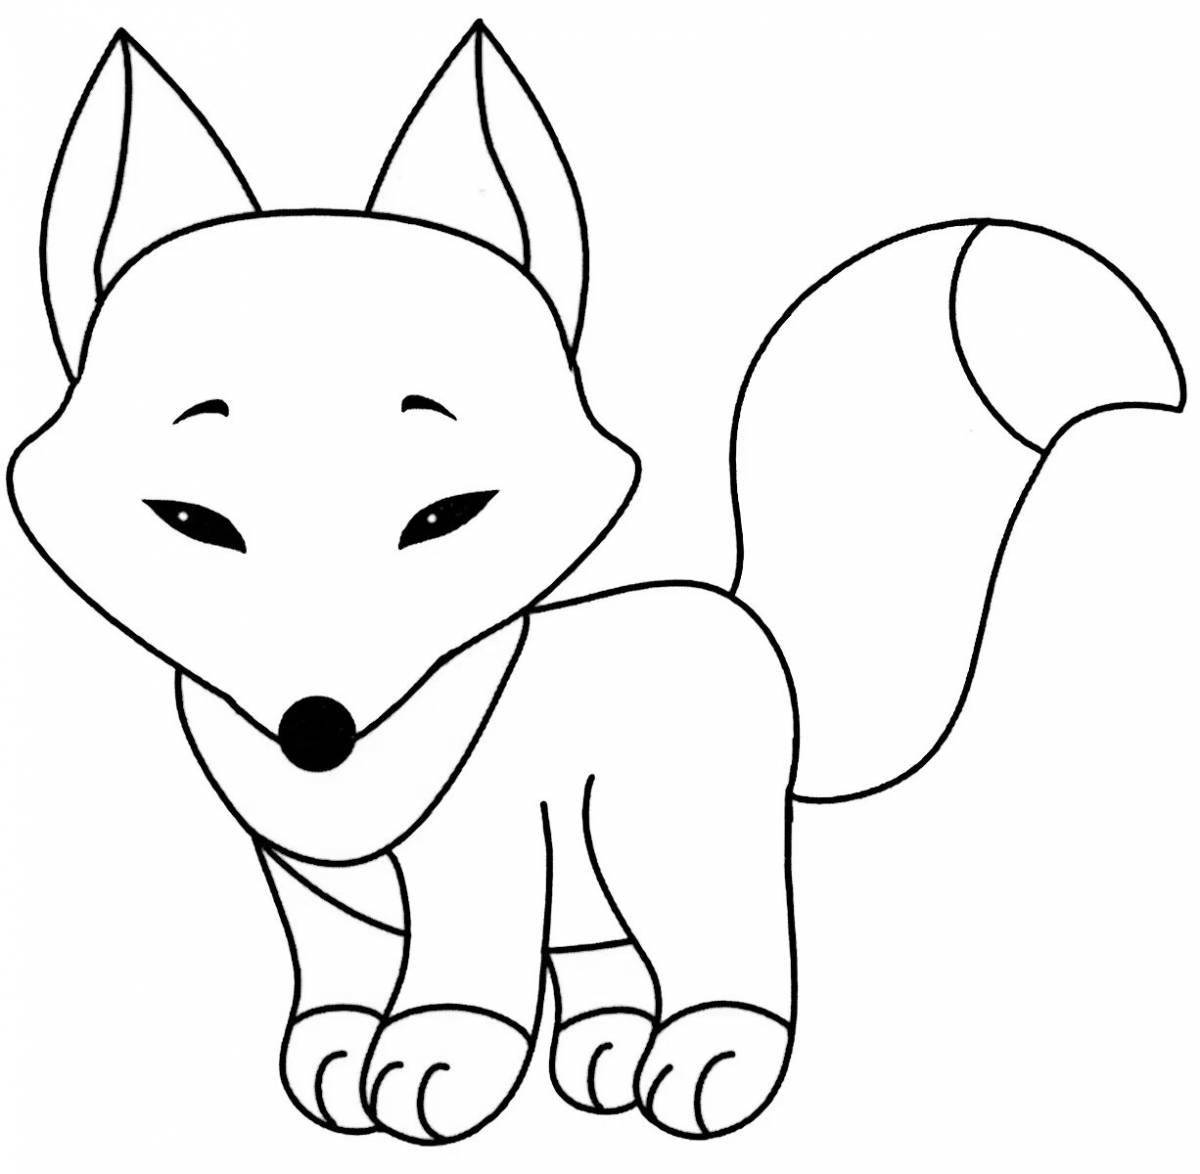 Sweet fox coloring book for children 4-5 years old